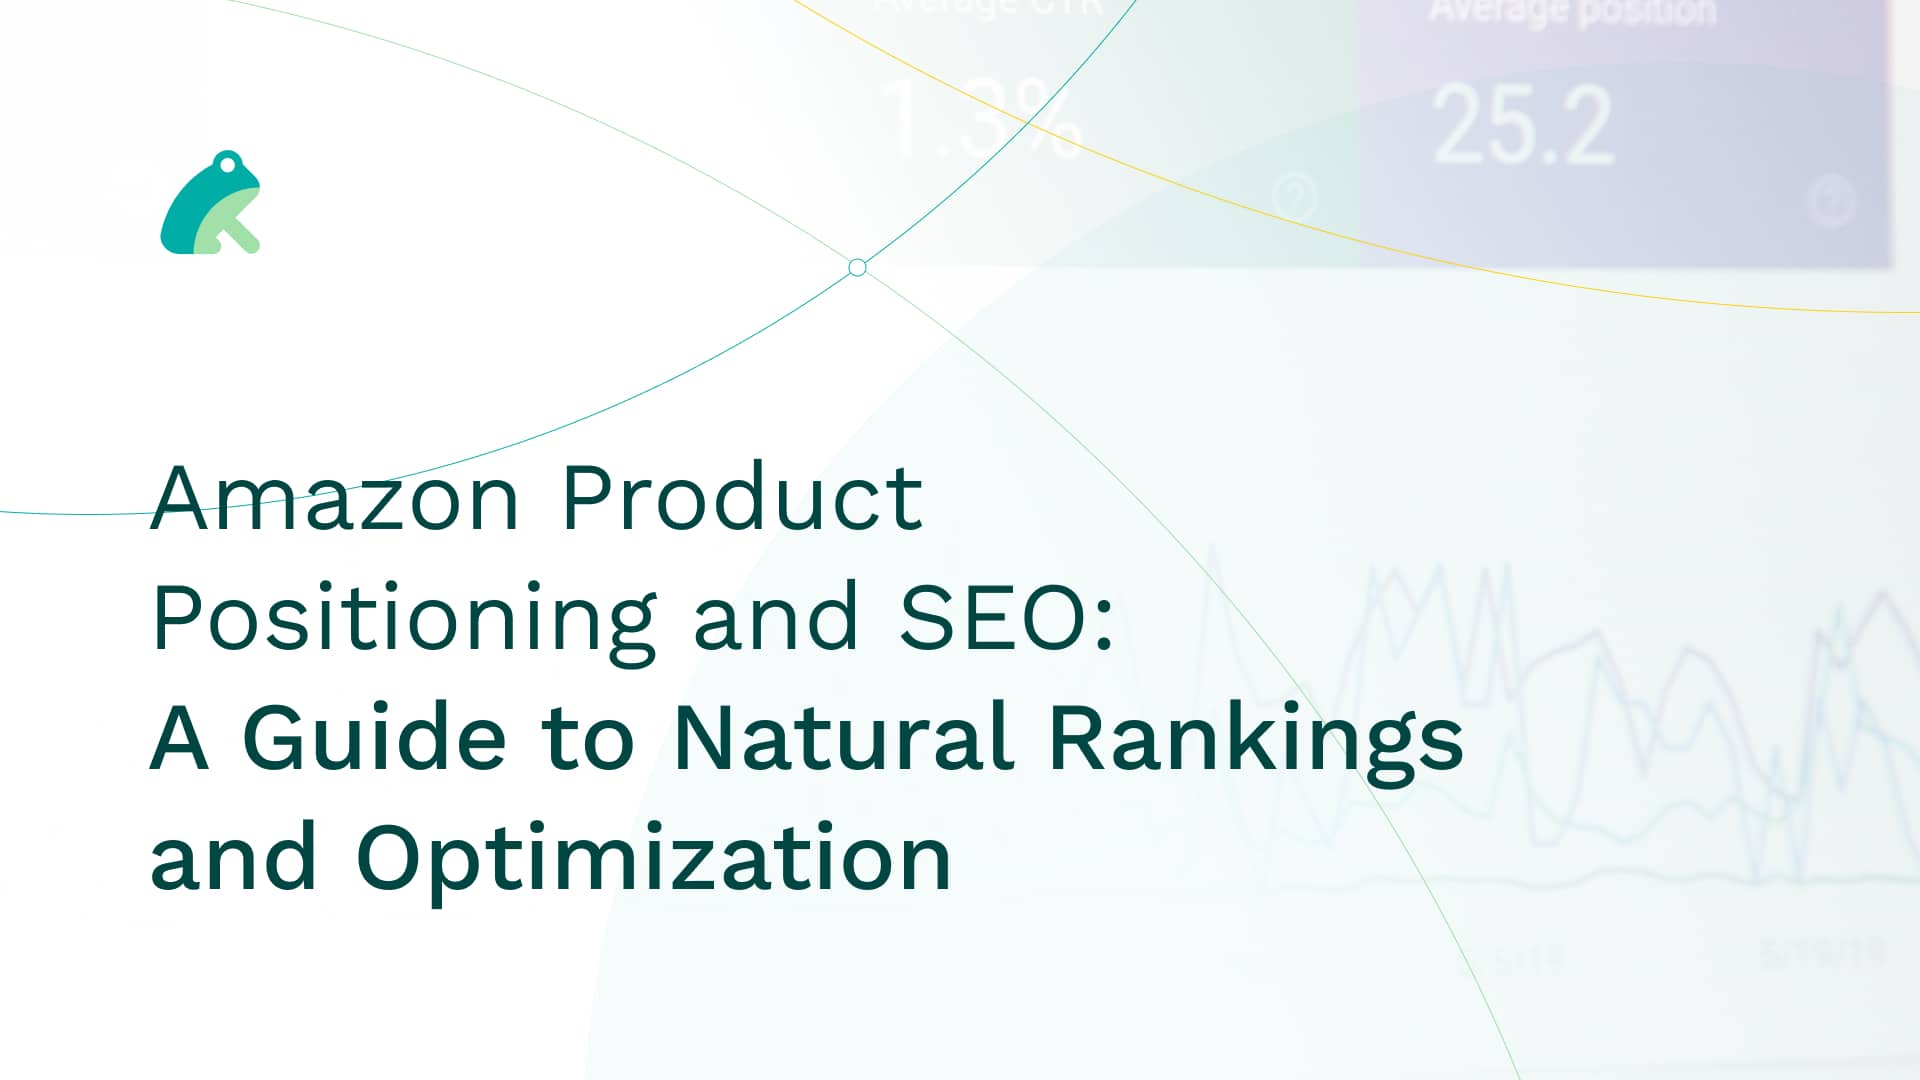 Amazon Product Positioning and SEO: A Guide to Natural Rankings and Optimization